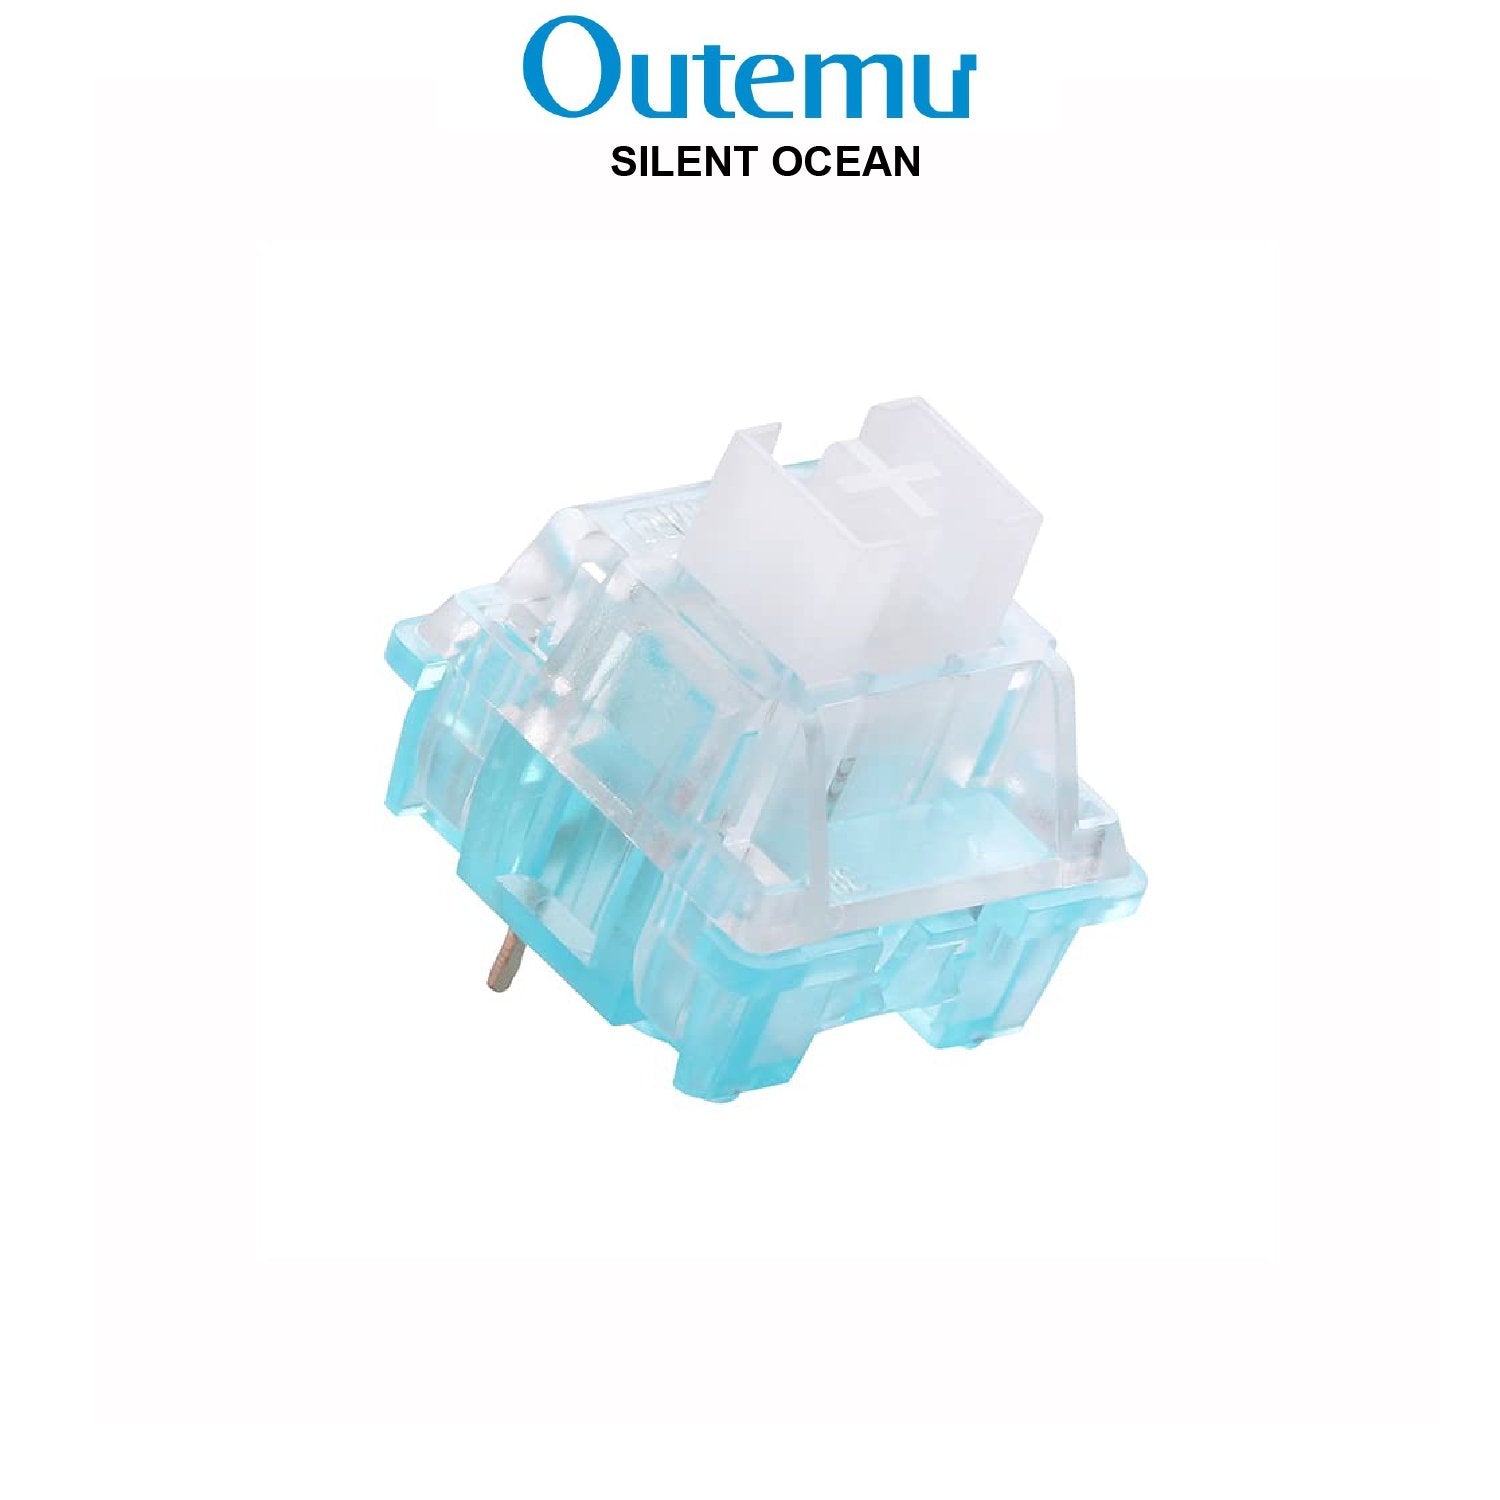 Outemu Silent Ocean Switches